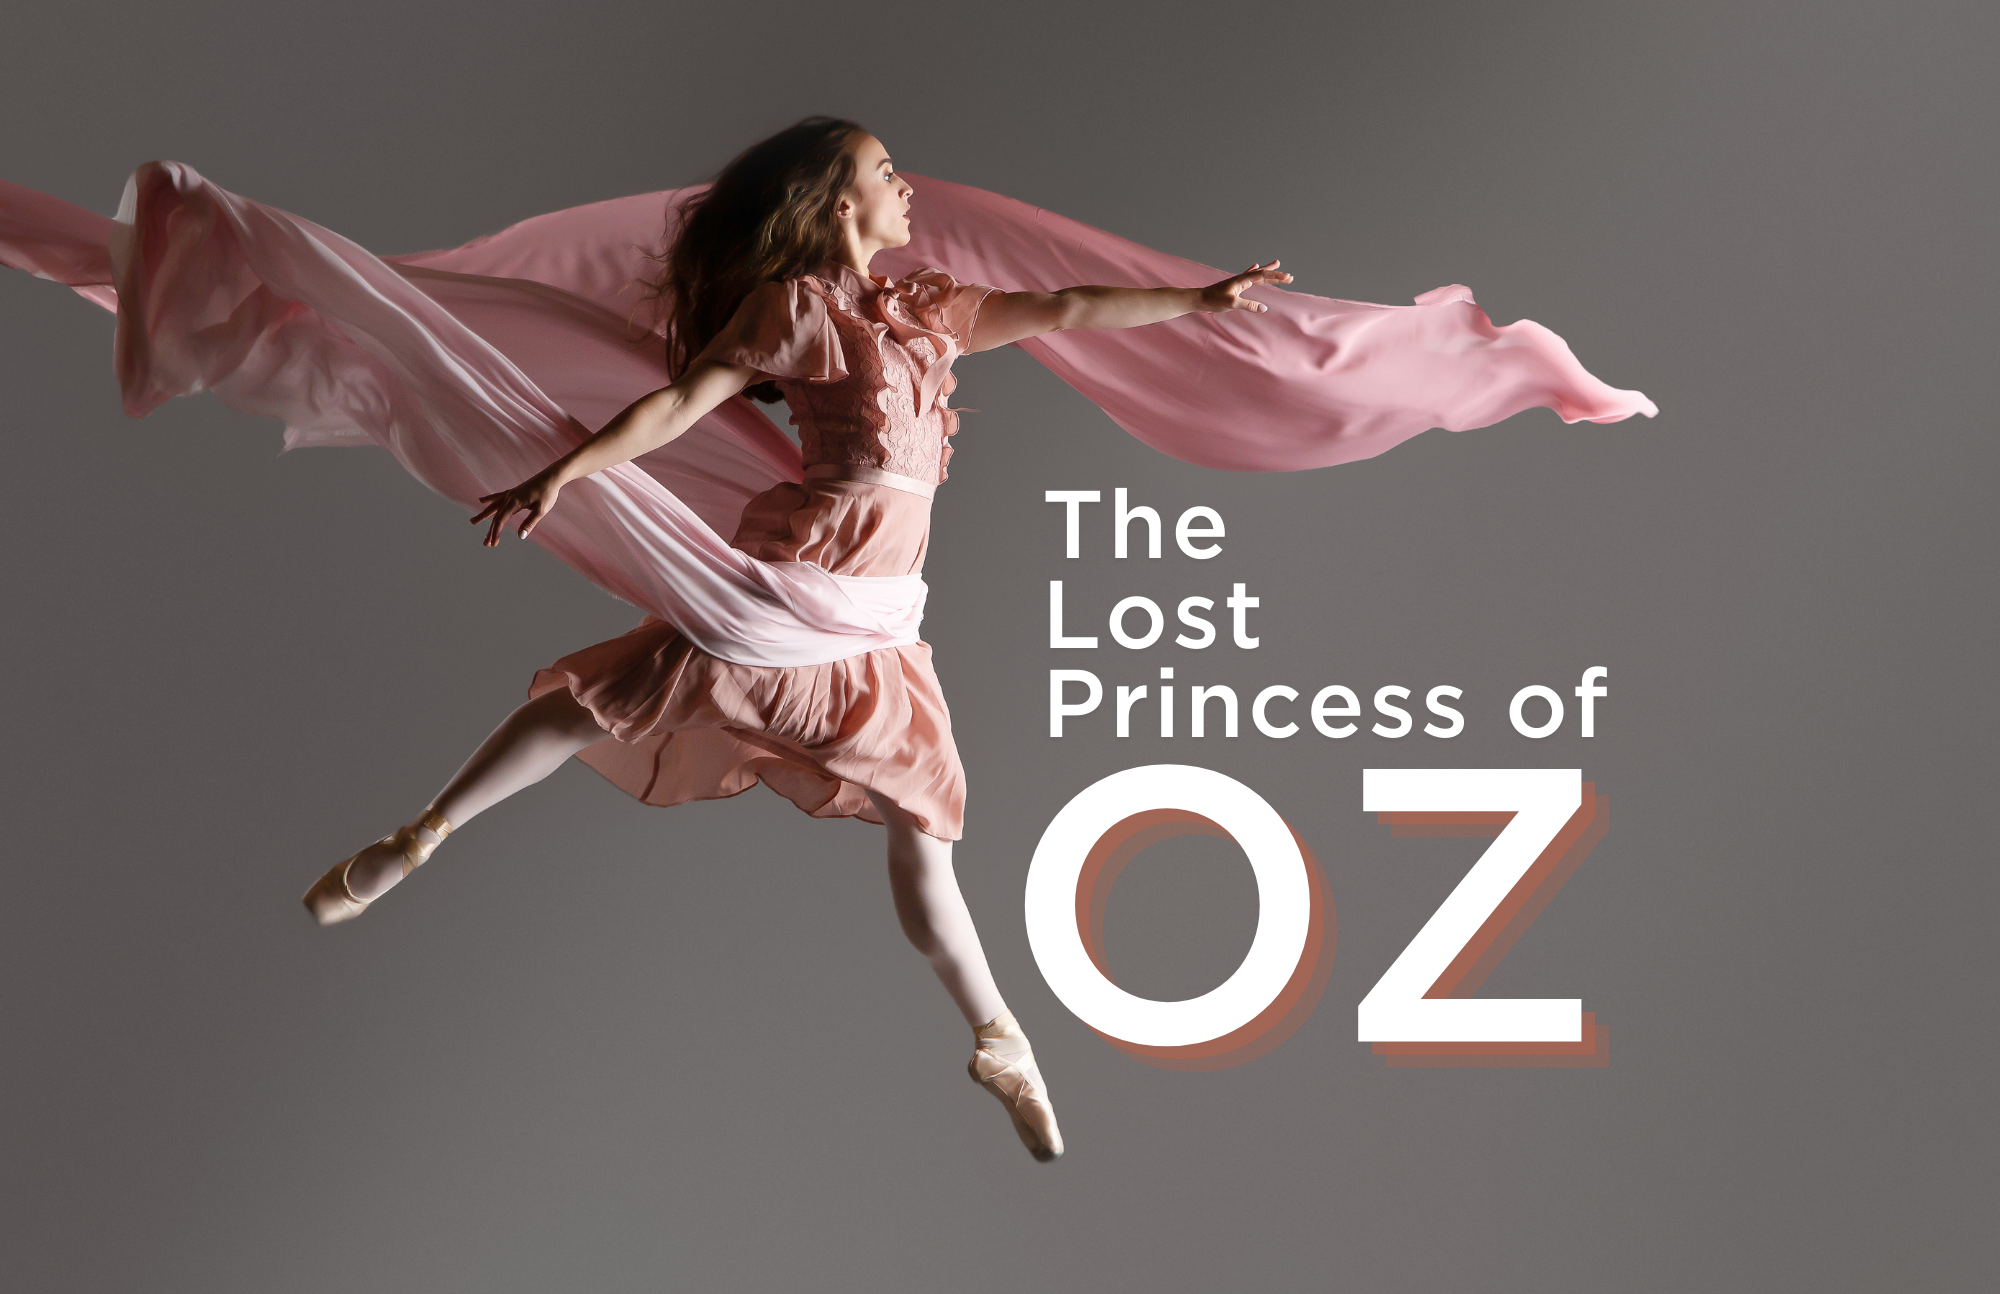 Axelrod Contemporary Ballet Theater Presents The World Premiere Of THE LOST PRINCESS OF OZ 